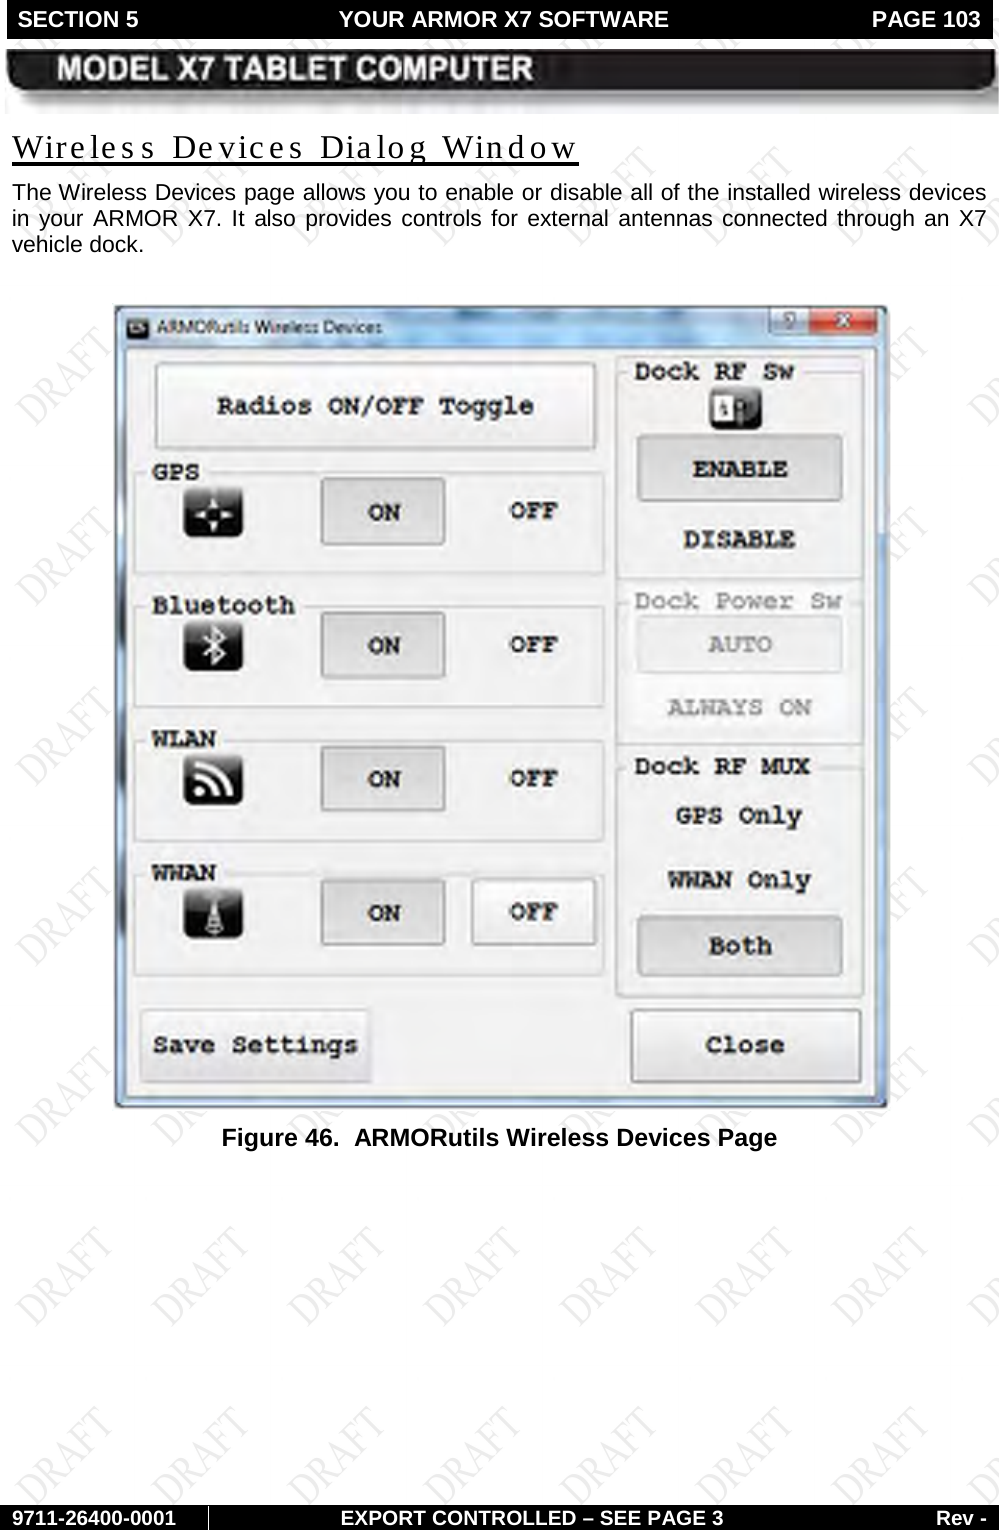 SECTION 5 YOUR ARMOR X7 SOFTWARE  PAGE 103        9711-26400-0001 EXPORT CONTROLLED – SEE PAGE 3 Rev - The Wireless Devices page allows you to enable or disable all of the installed wireless devices in your ARMOR X7. It also provides controls for external antennas connected through an X7 vehicle dock. Wireless Devices Dialog Window   Figure 46.  ARMORutils Wireless Devices Page    